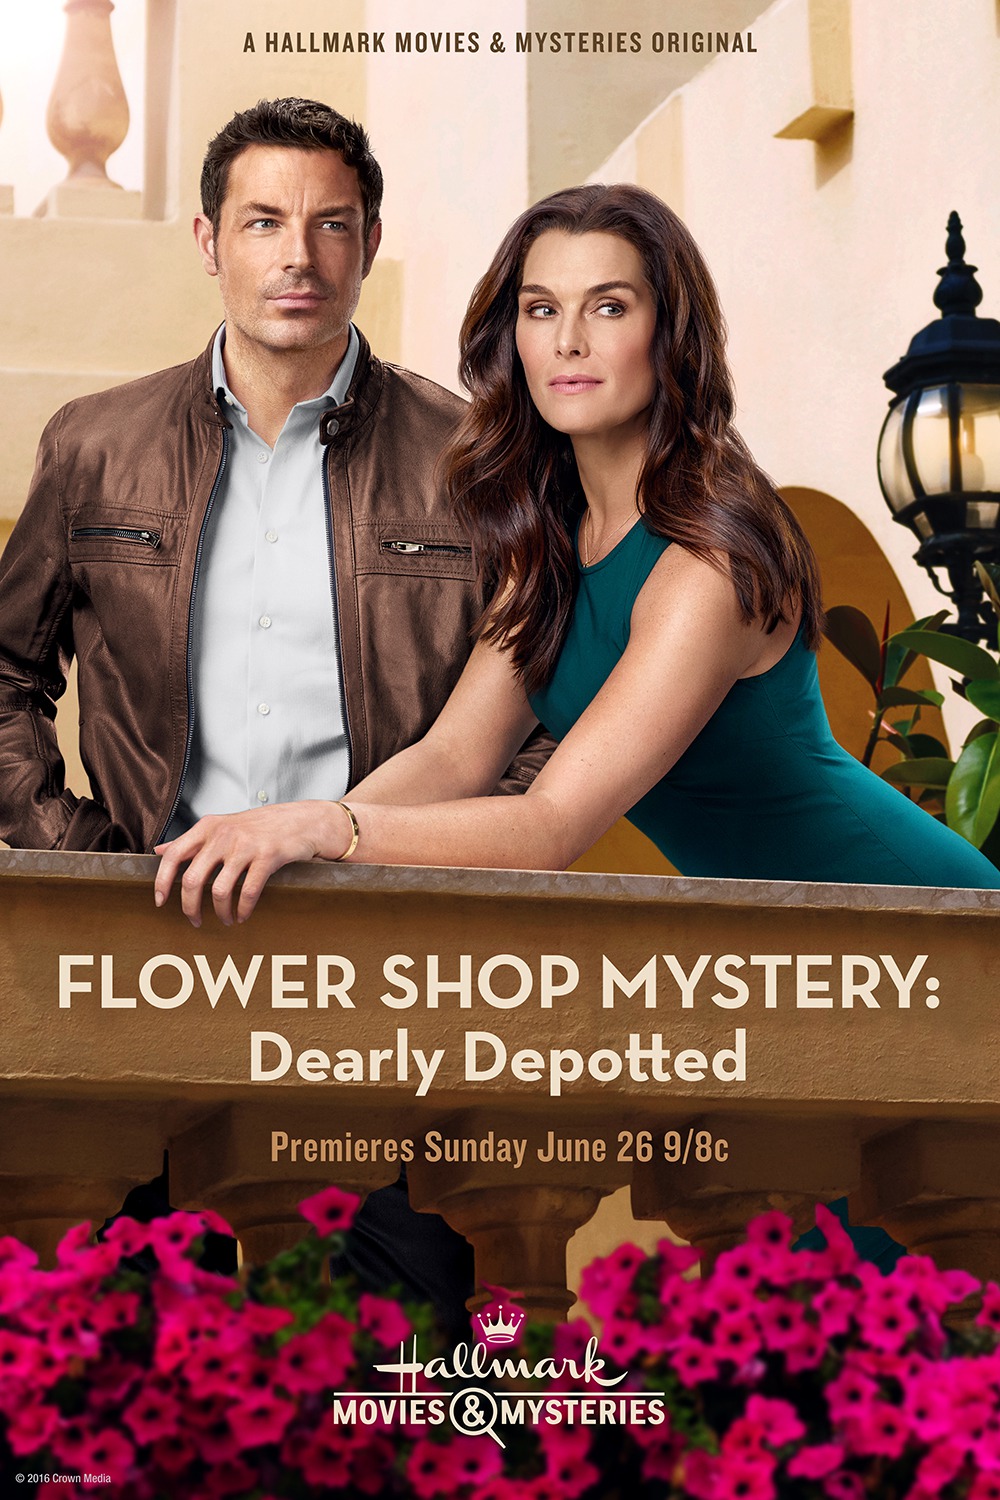 Extra Large TV Poster Image for Flower Shop Mystery: Dearly Depotted 